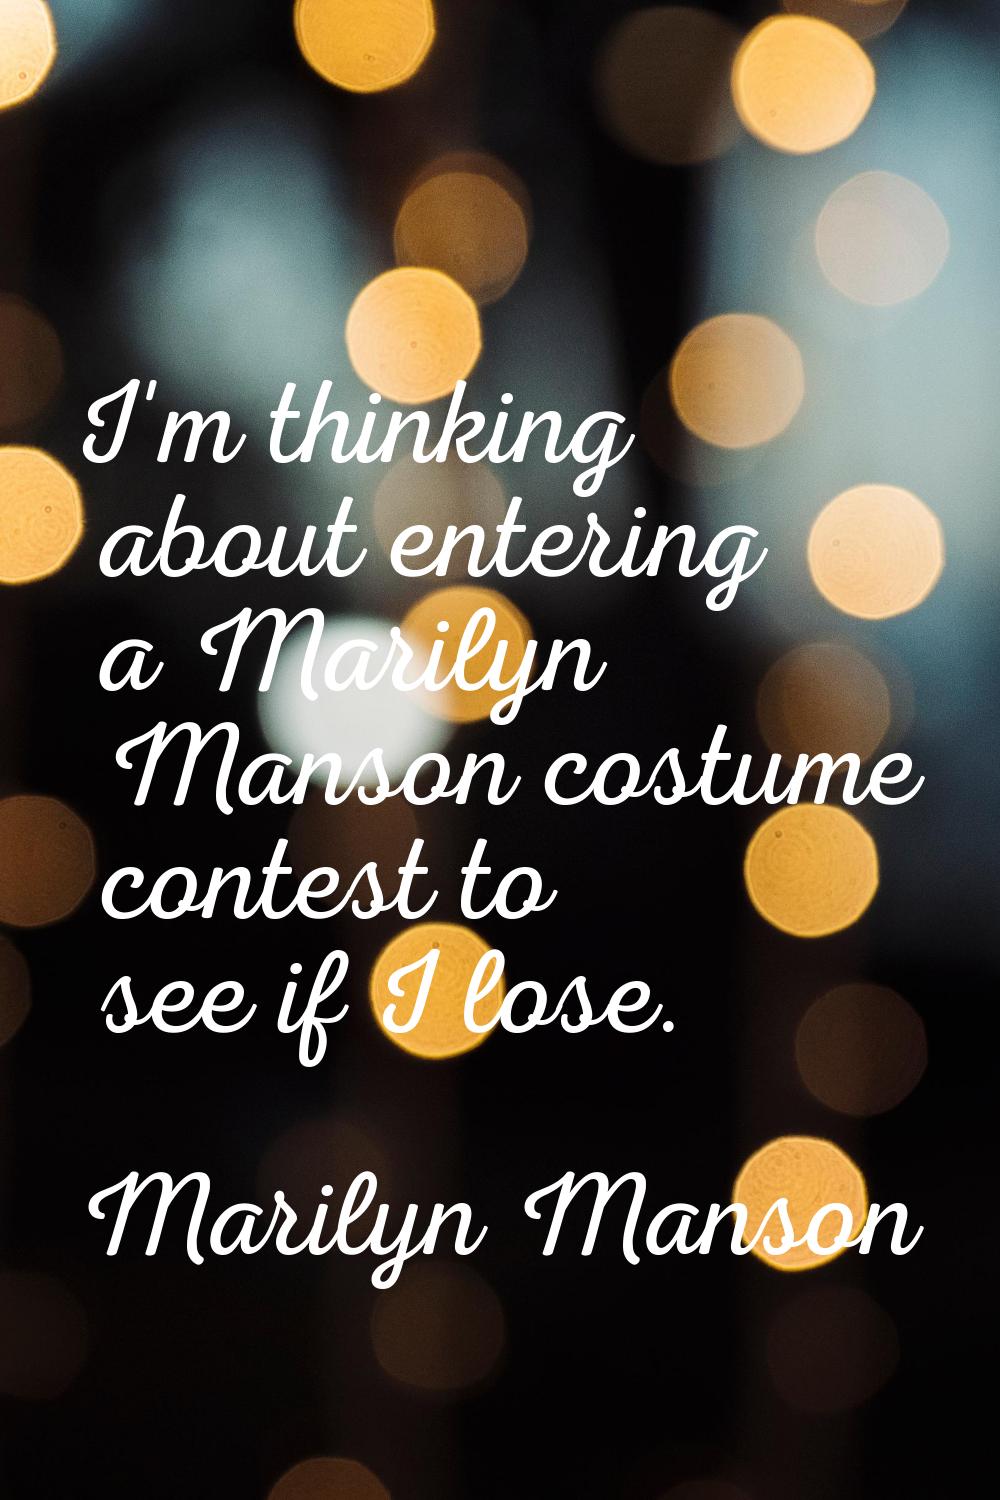 I'm thinking about entering a Marilyn Manson costume contest to see if I lose.